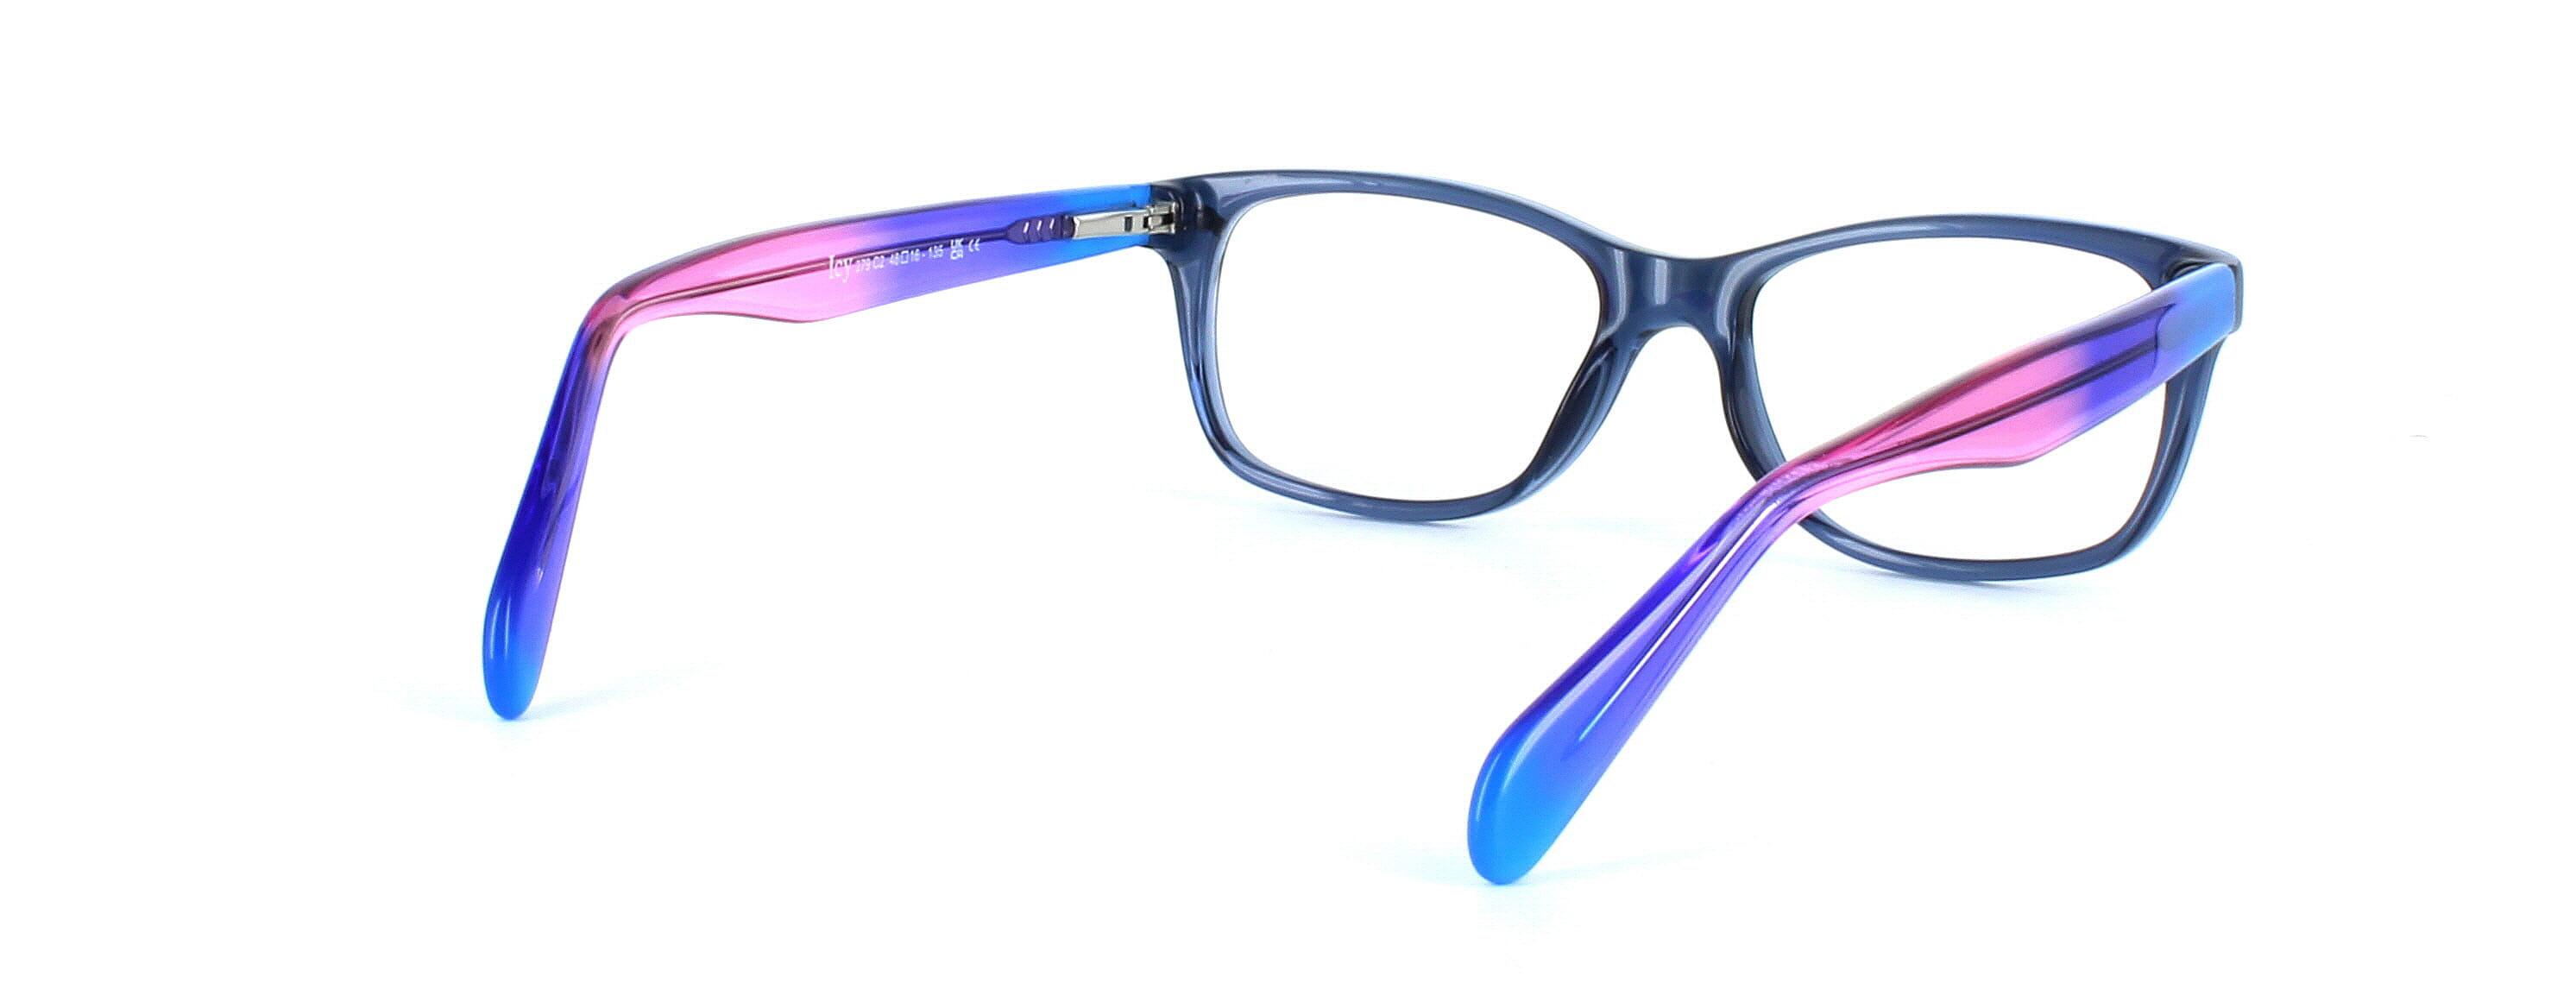 Liguria - Blue - Women's petite acetate glasses frame in blue with multi-coloured arms - image view 5